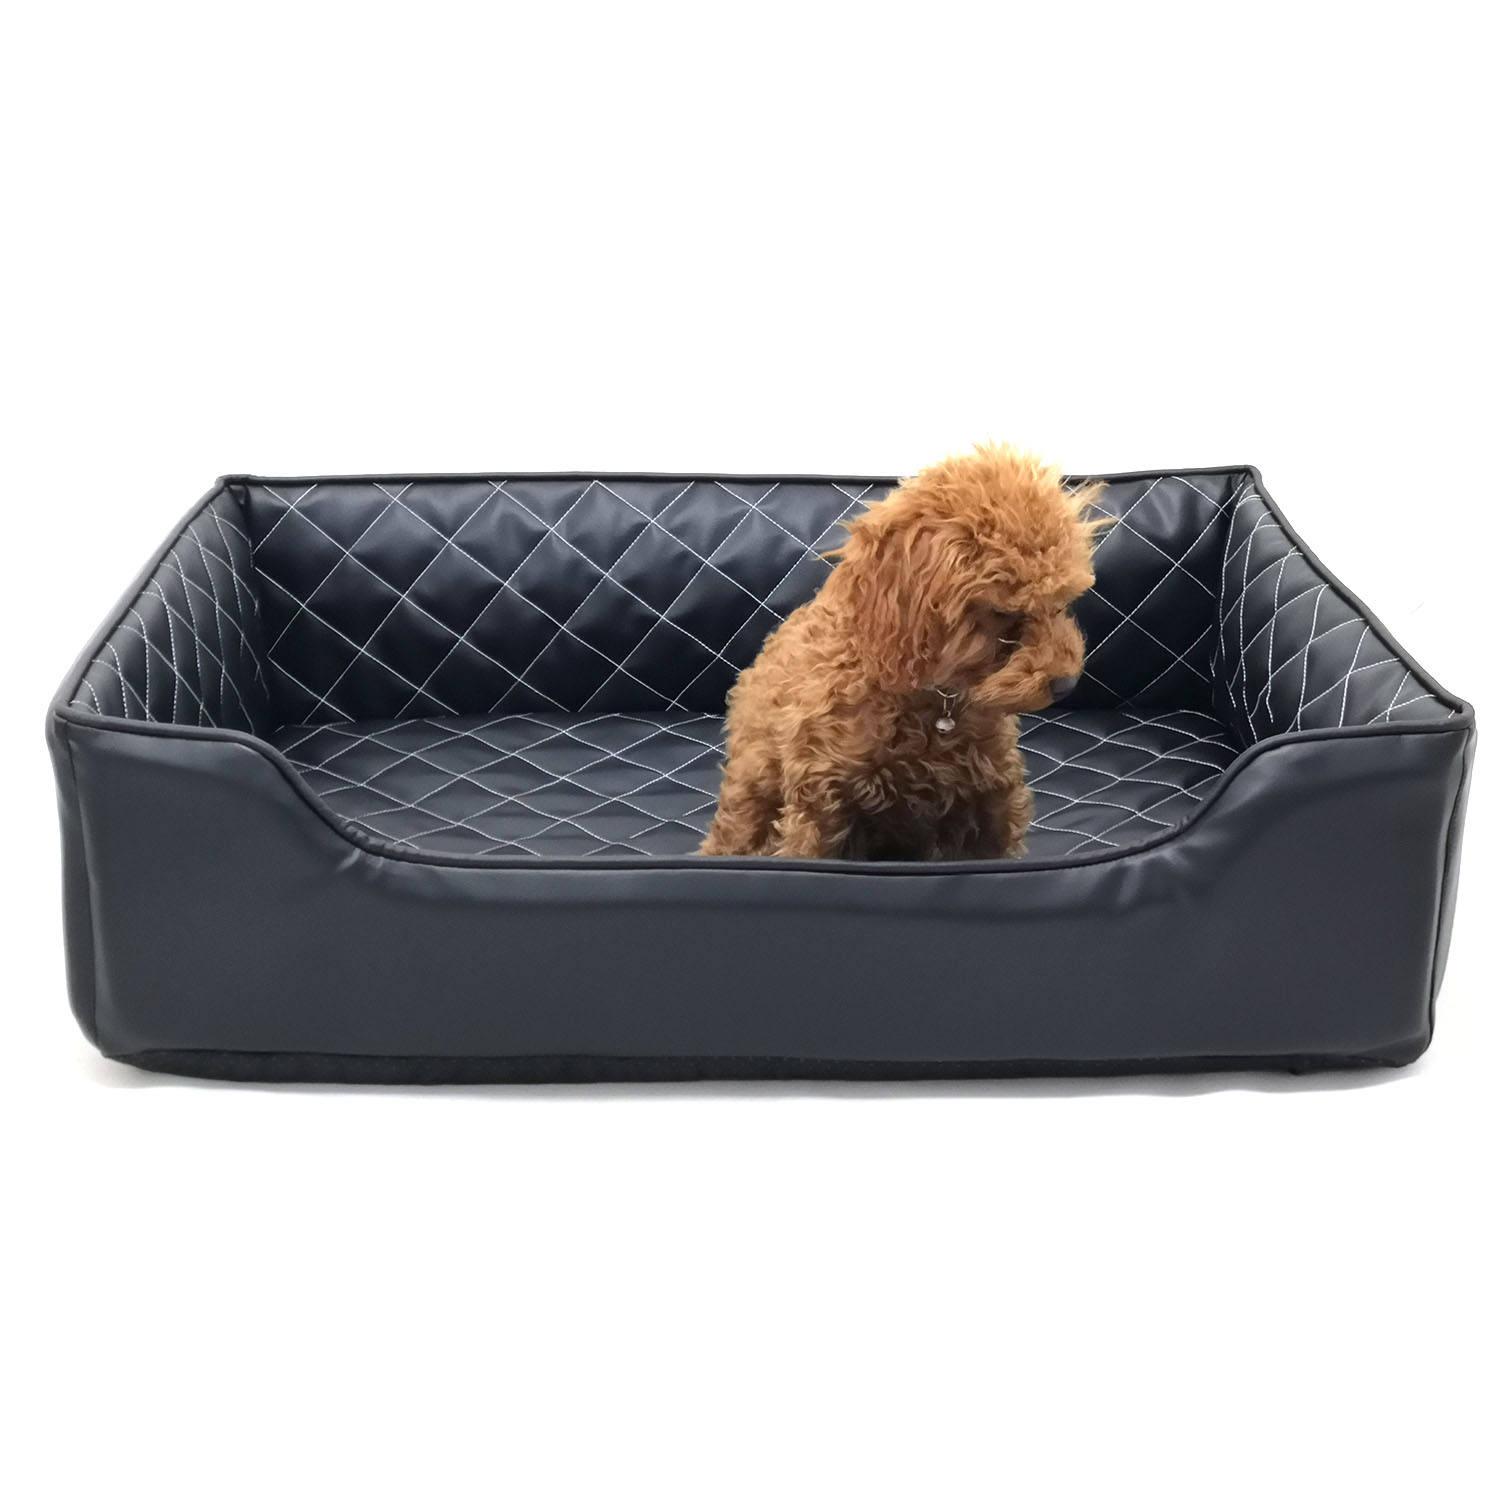 pet Luxury Dog Bed Crate Matt Leather For Dogs Washable Memory Foam Leather Bed For Large Dog